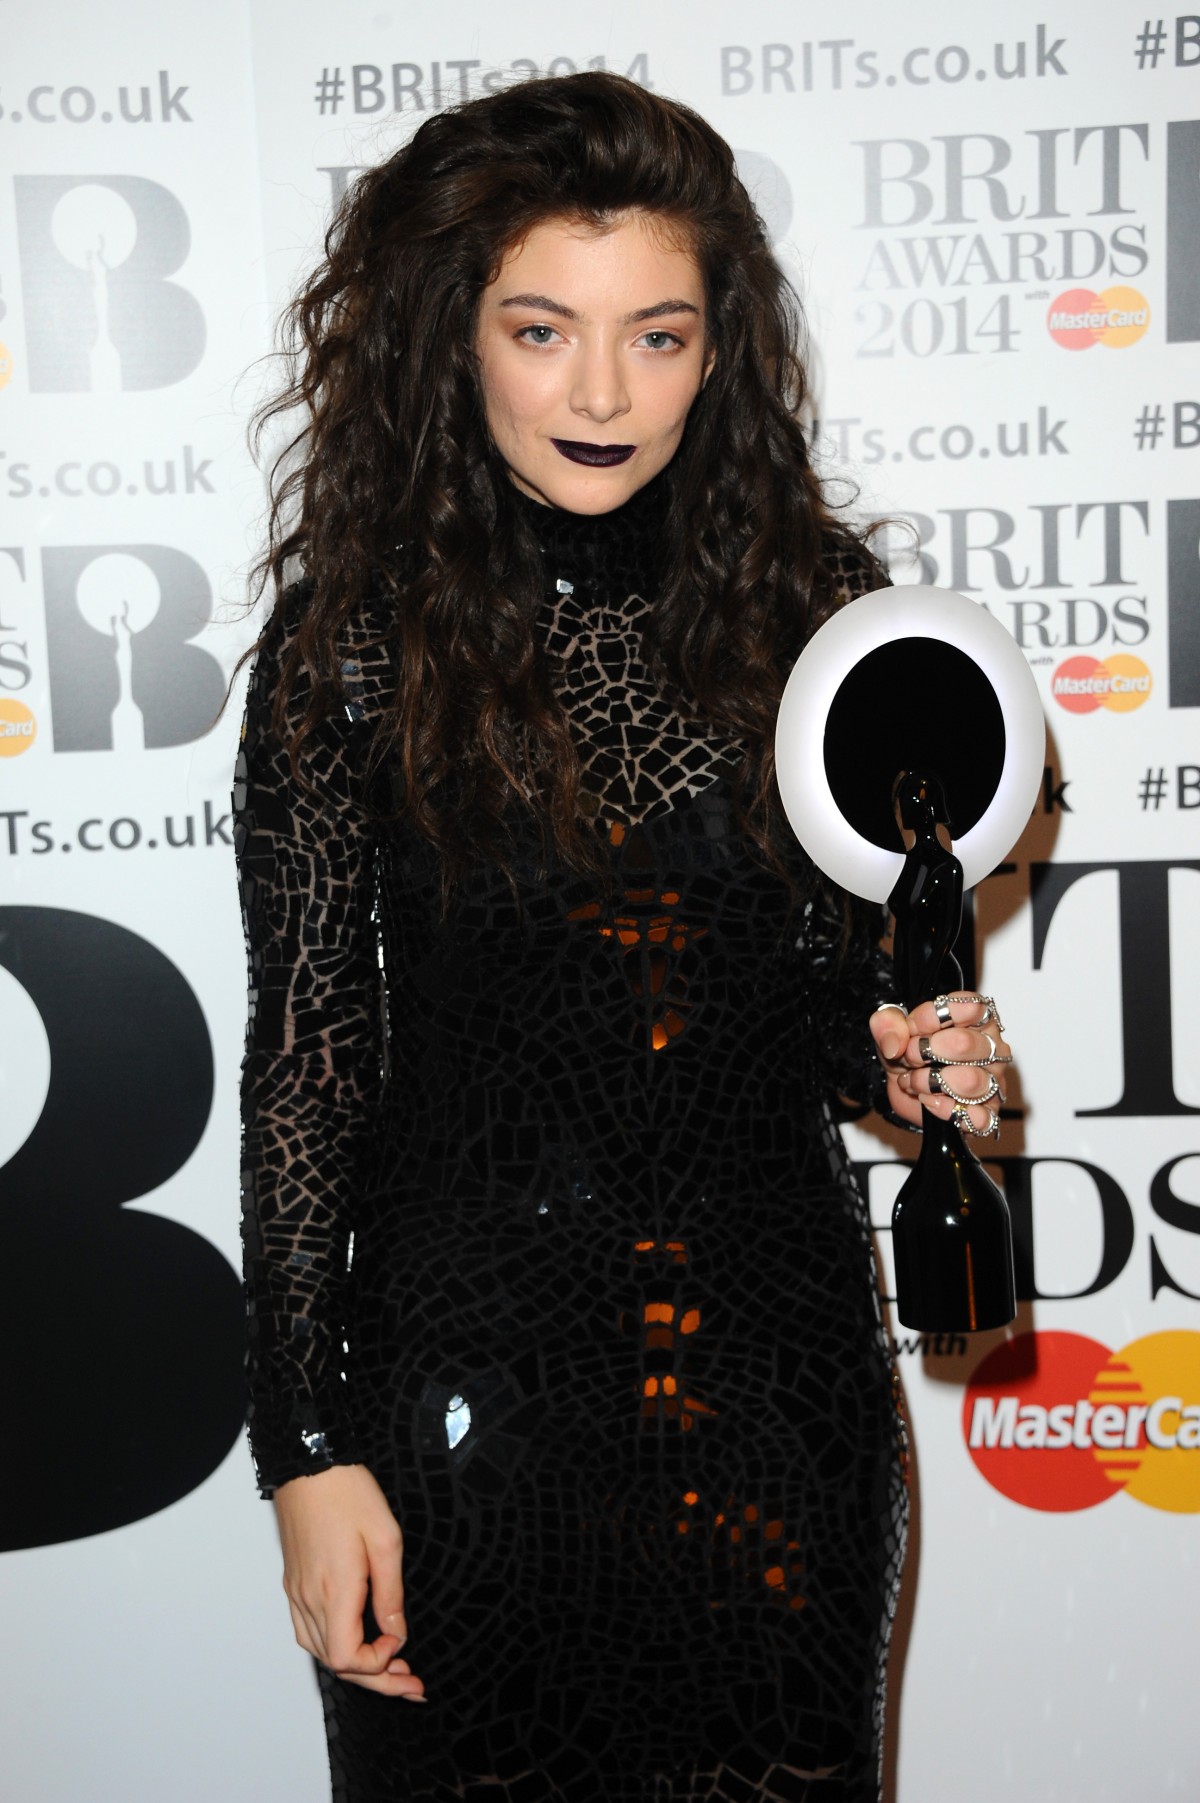 Get The Look: Lorde's Makeup At The BRIT Awards 2014